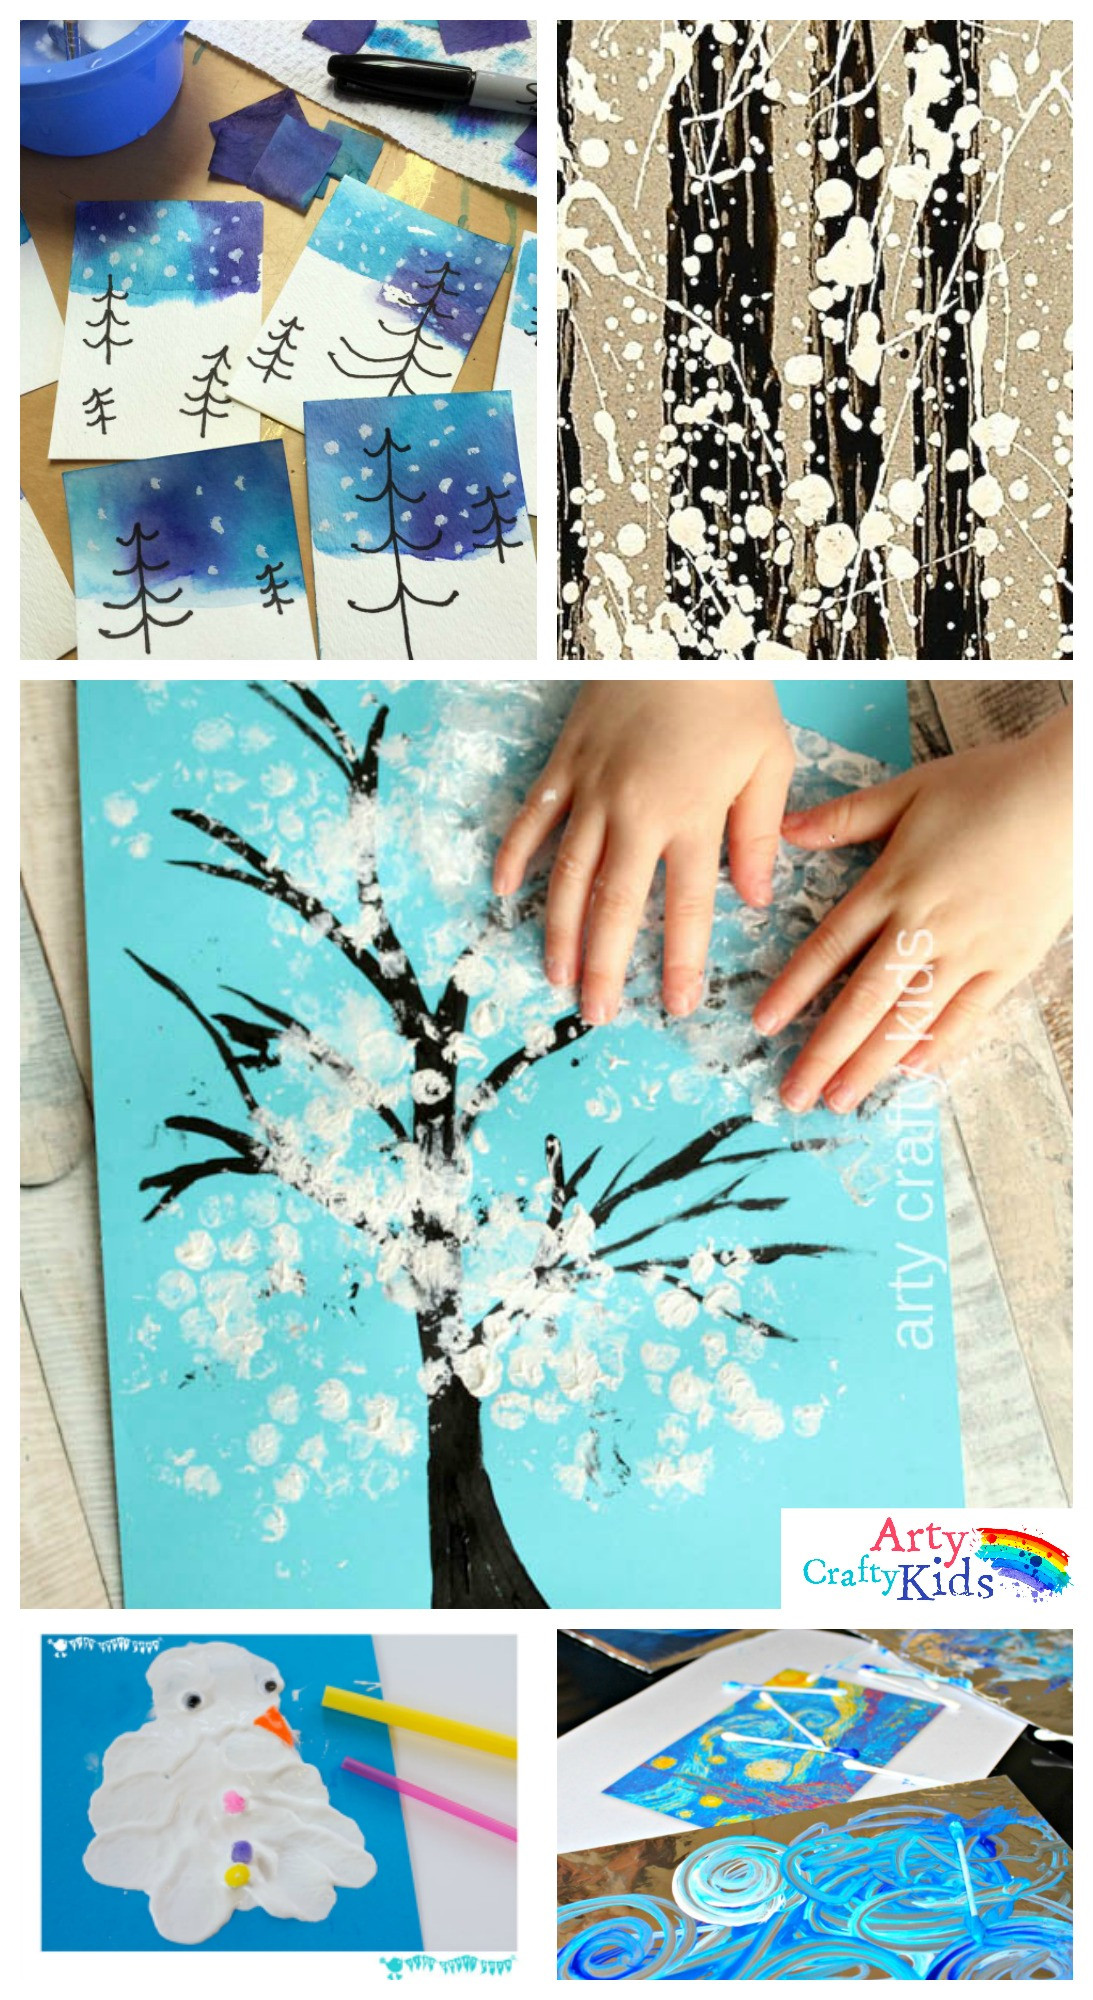 Winter Art Activities For Toddlers
 14 Wonderful Winter Art Projects for Kids